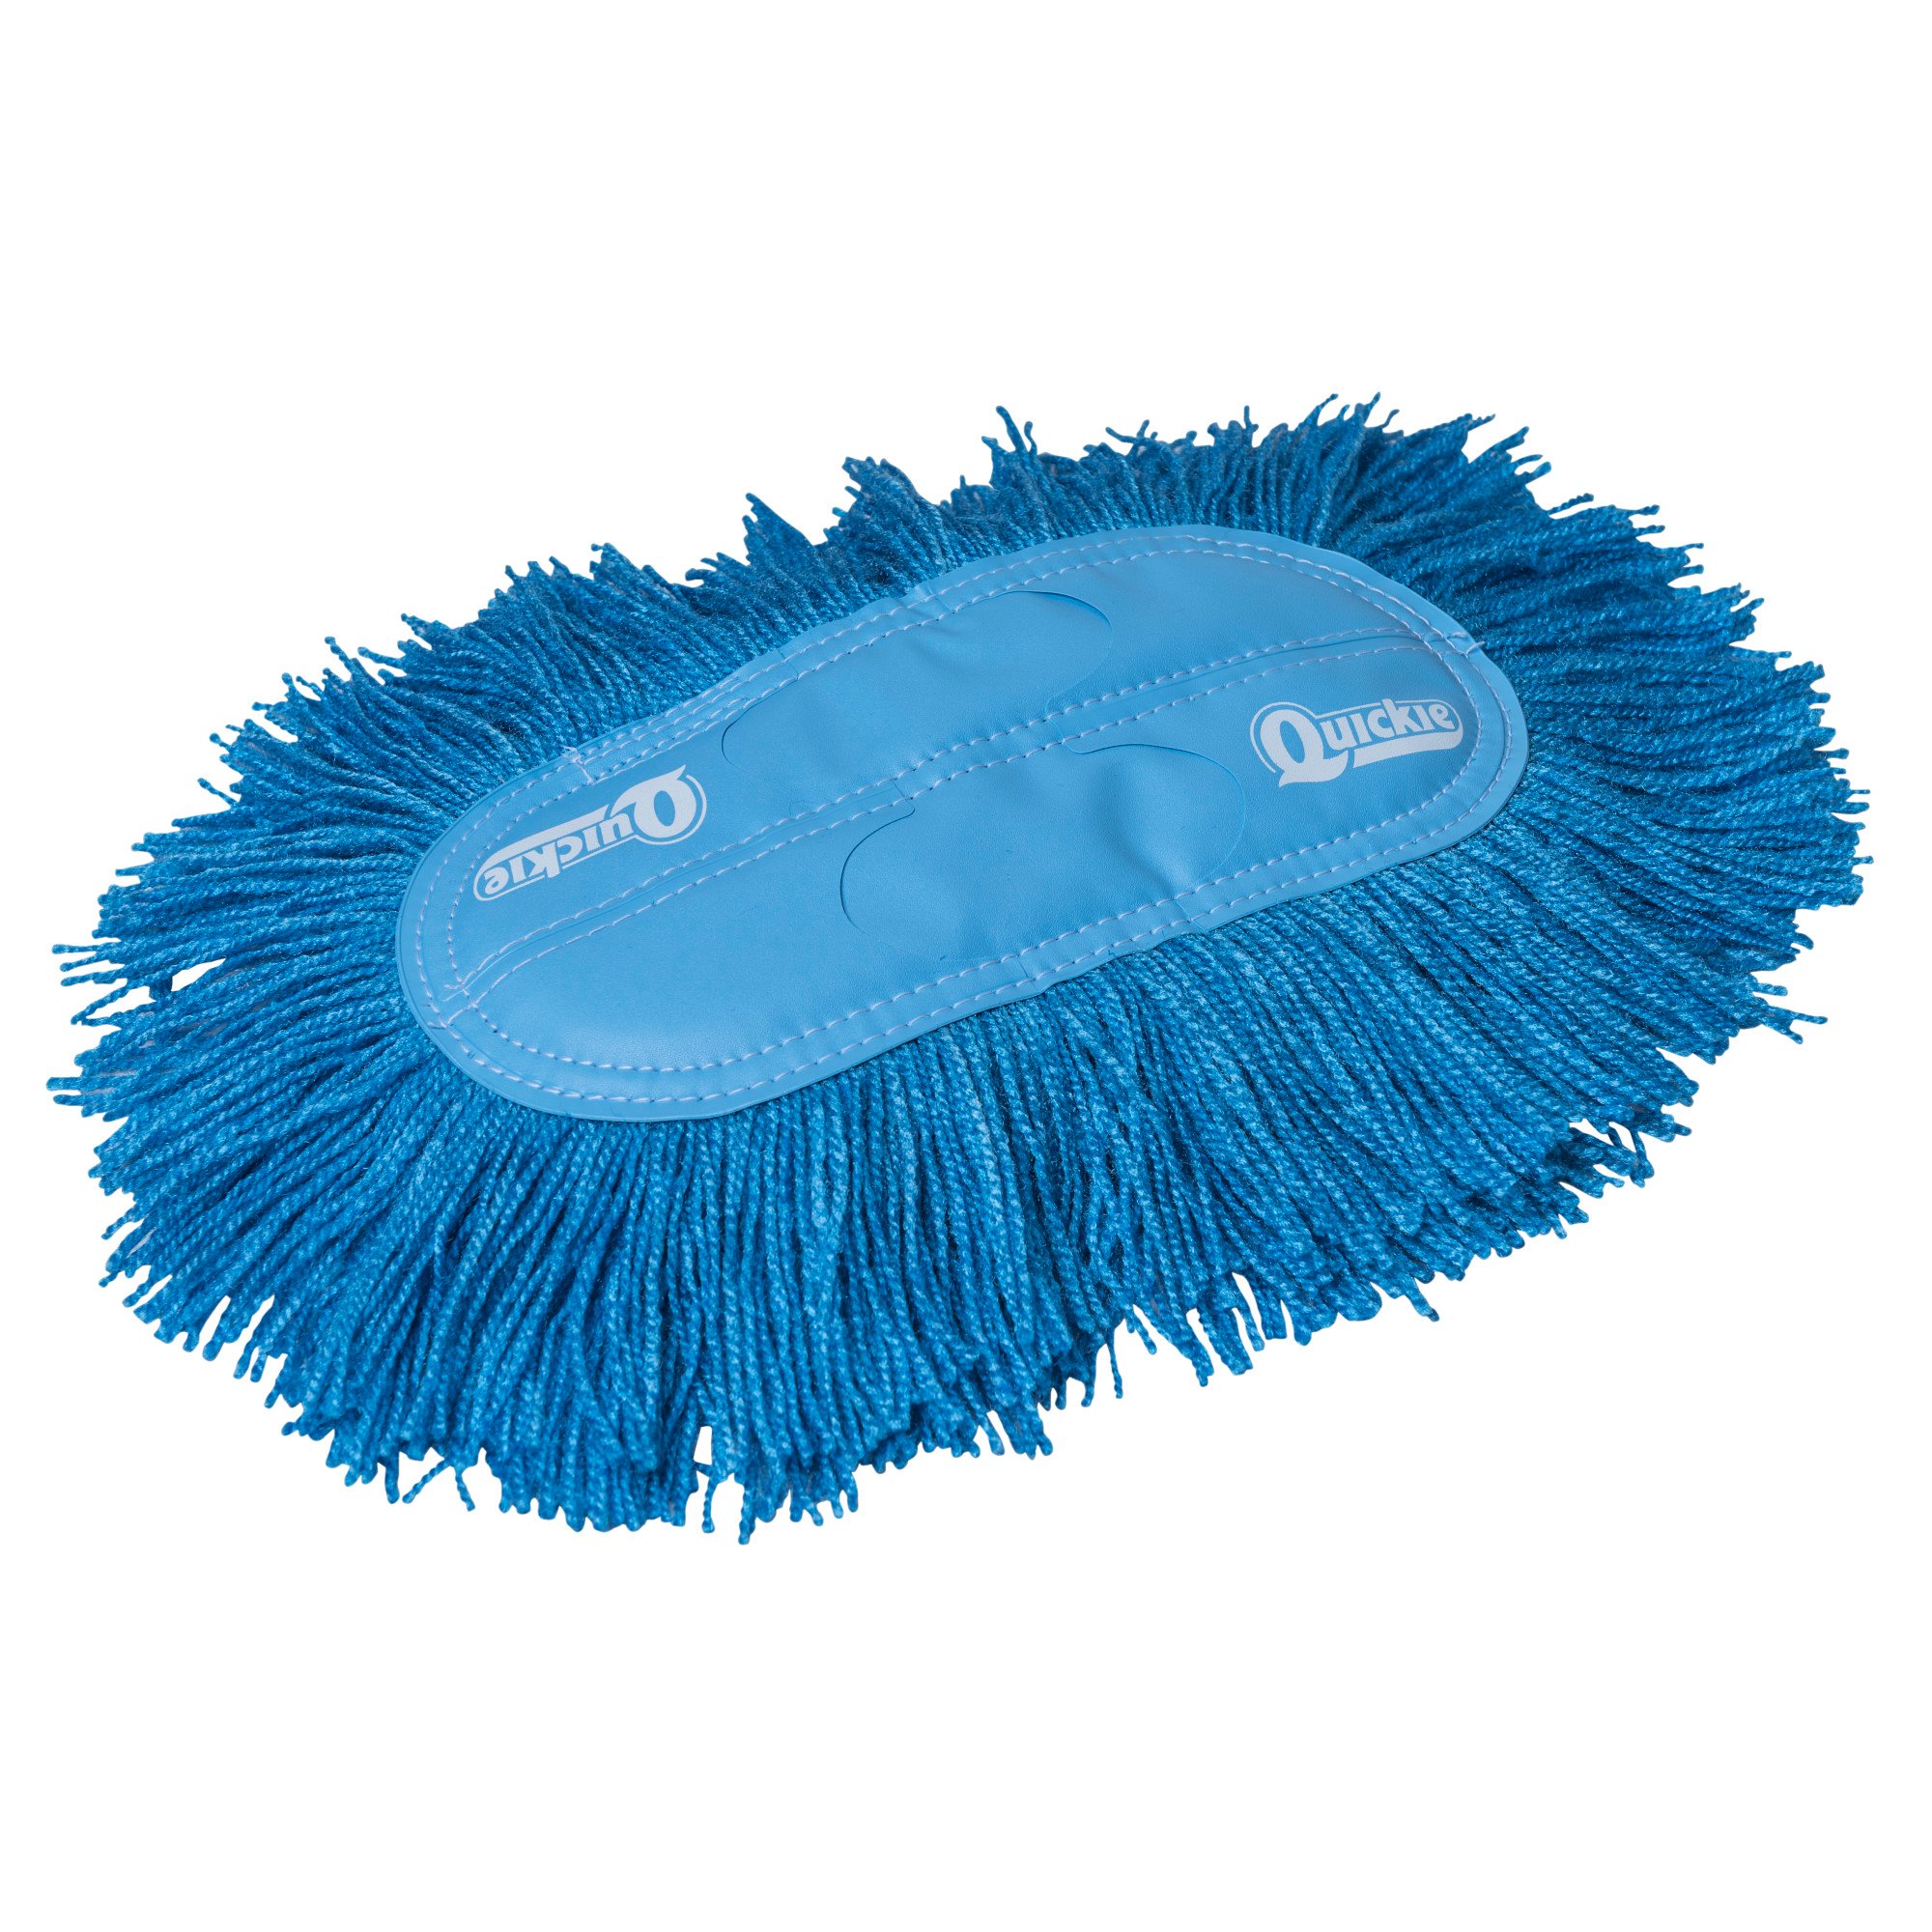 Quickie® Nylon Dust Mop Refill image number null